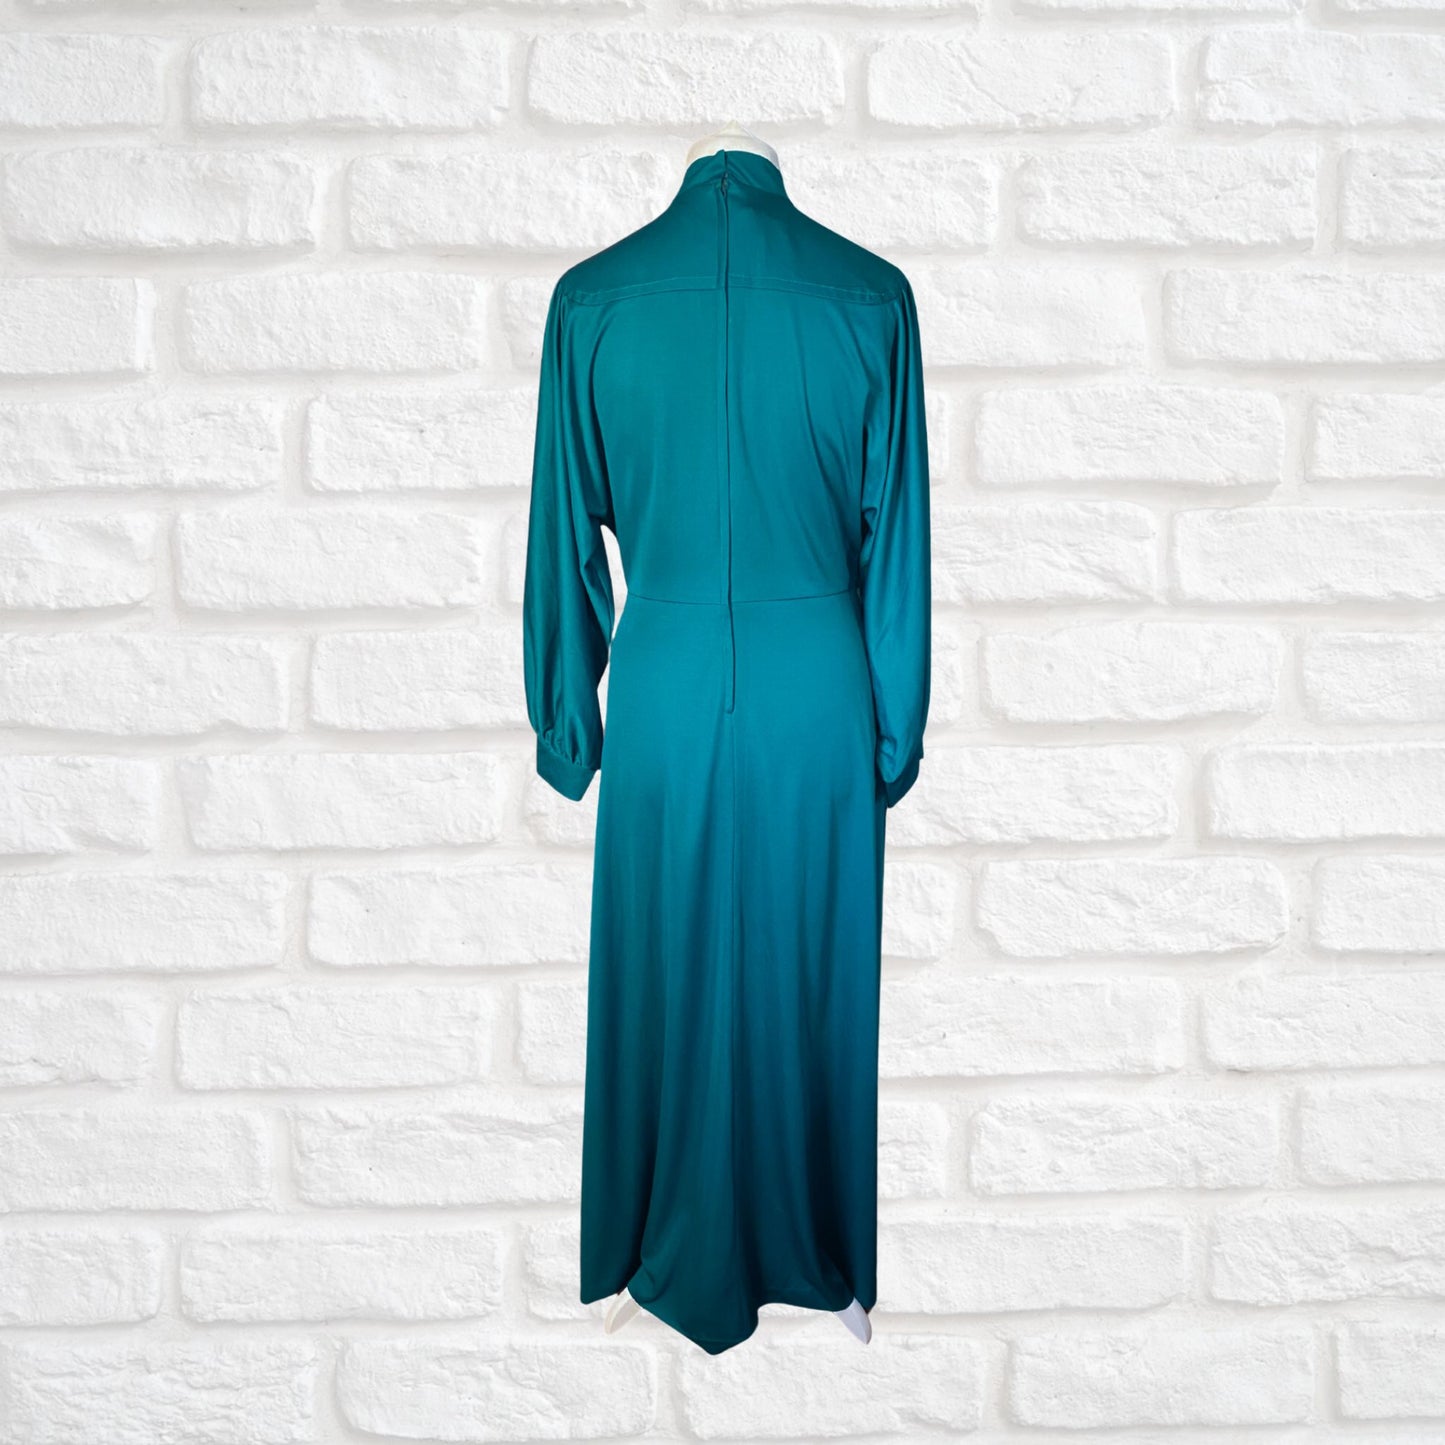 70s Vintage Teal Long Sleeved Maxi Dress by Peggy Page. Approx UK size 14-16